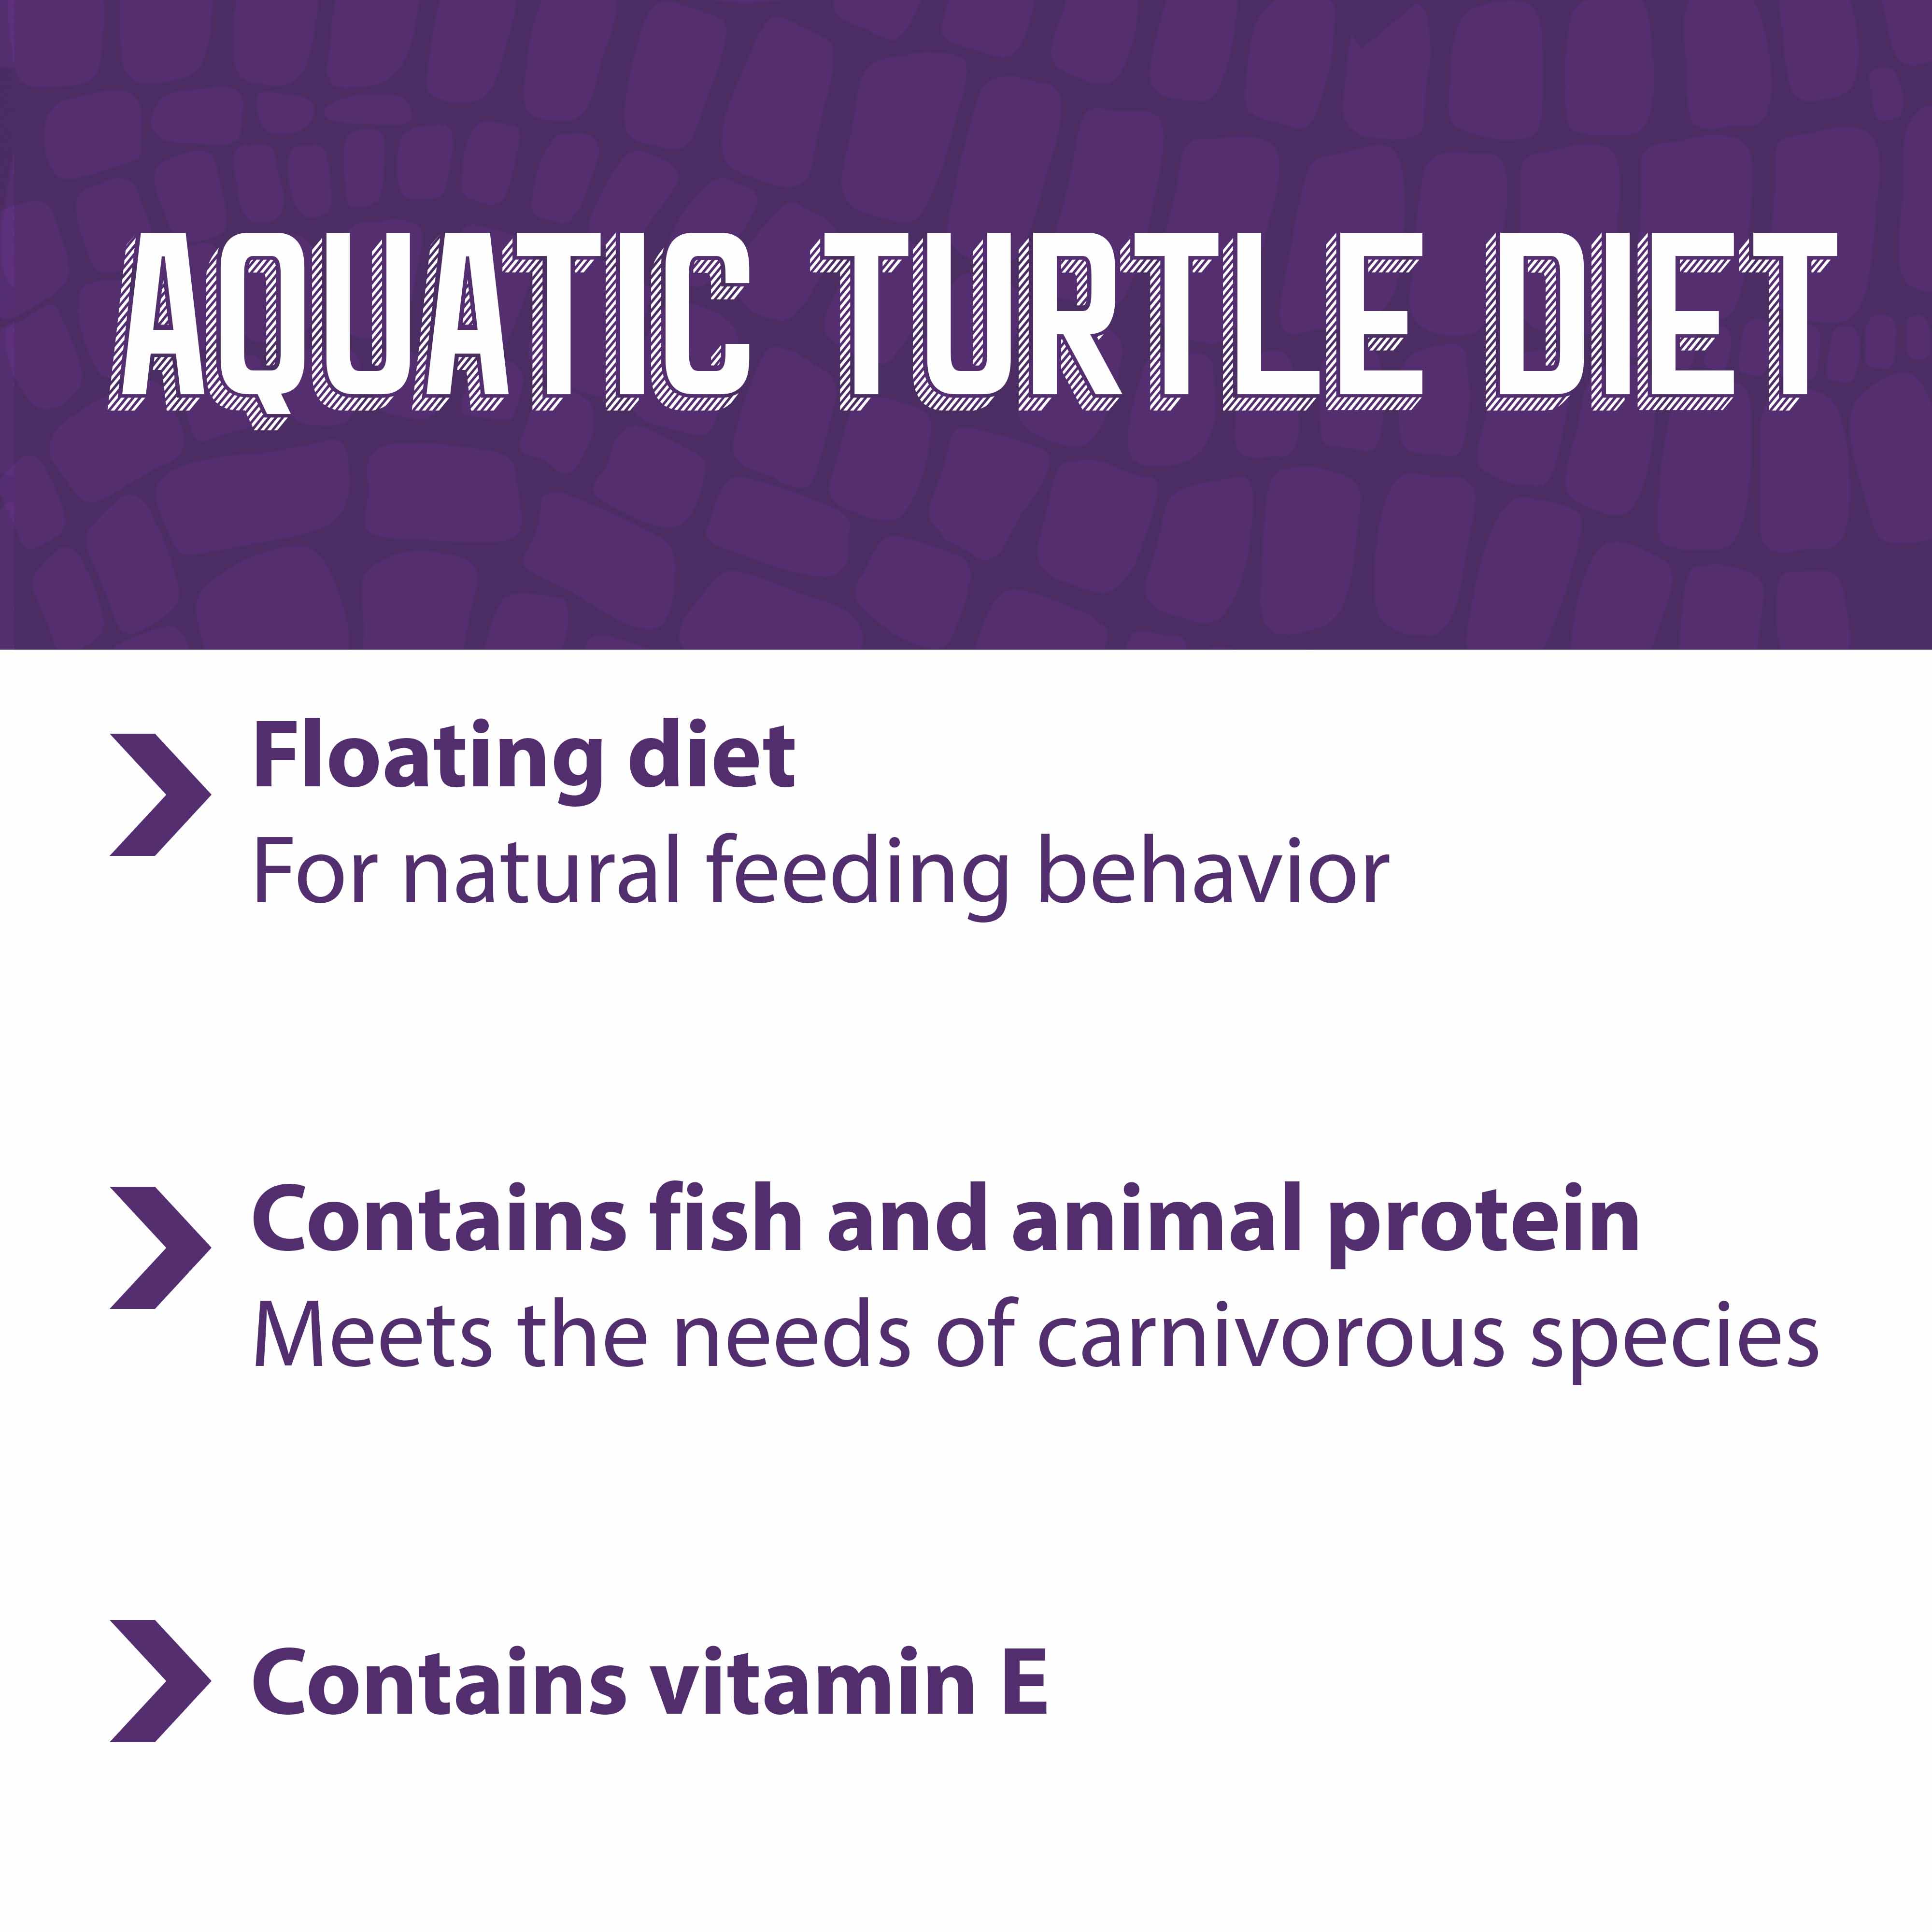 Aquatic turtle diet contains fish and animal protein